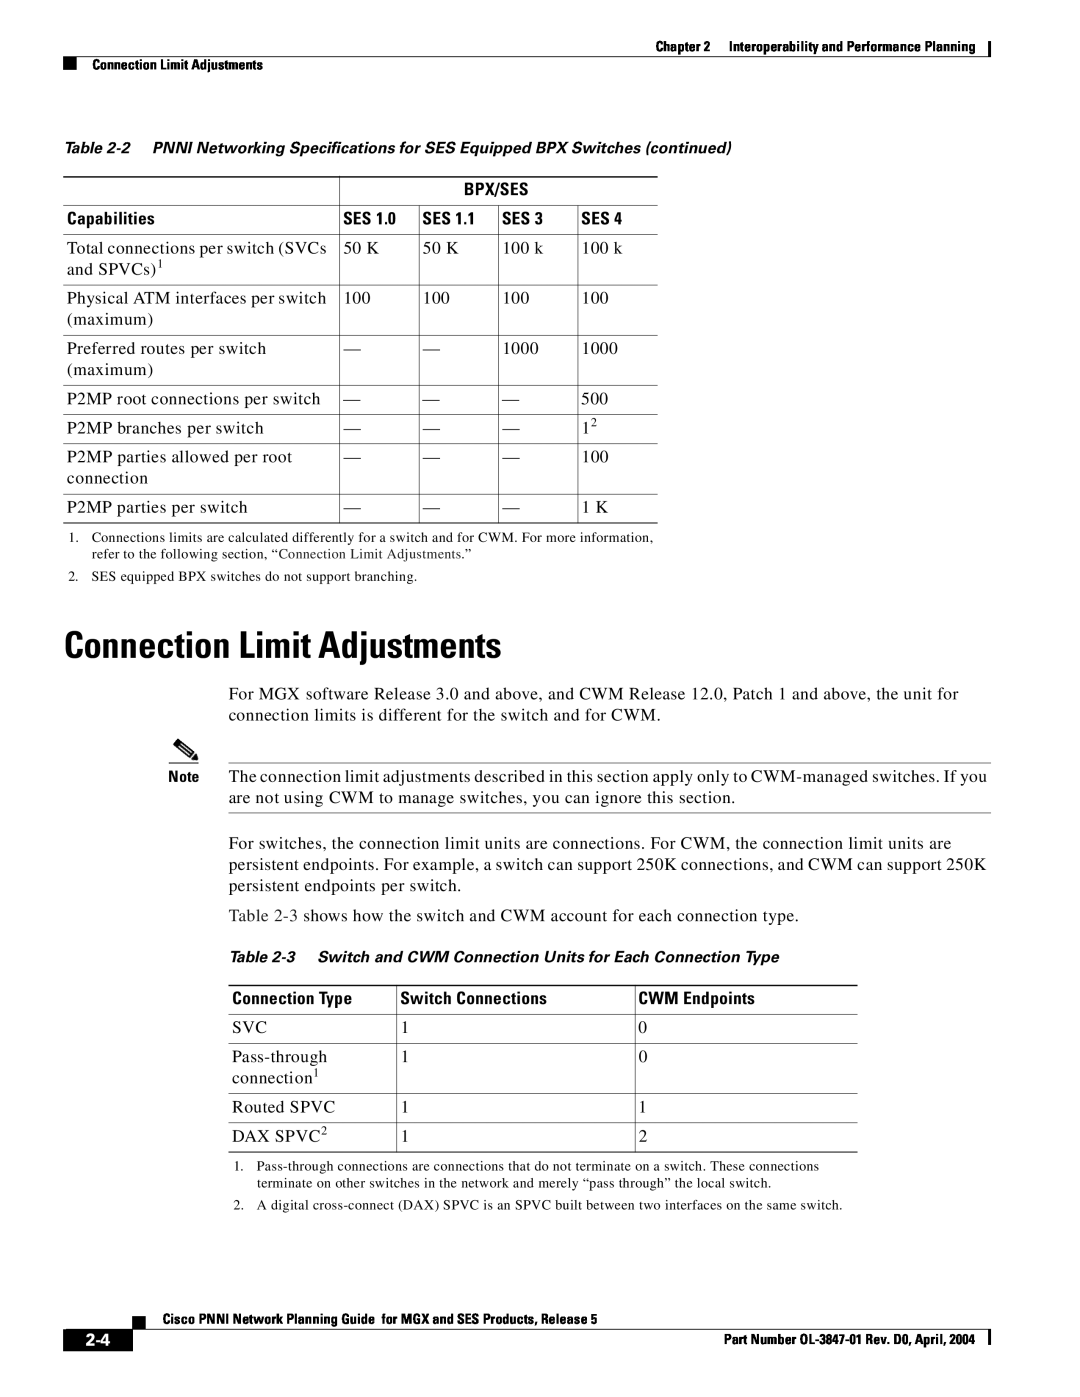 Cisco Systems Network Router Connection Limit Adjustments, 3 Switch and CWM Connection Units for Each Connection Type 